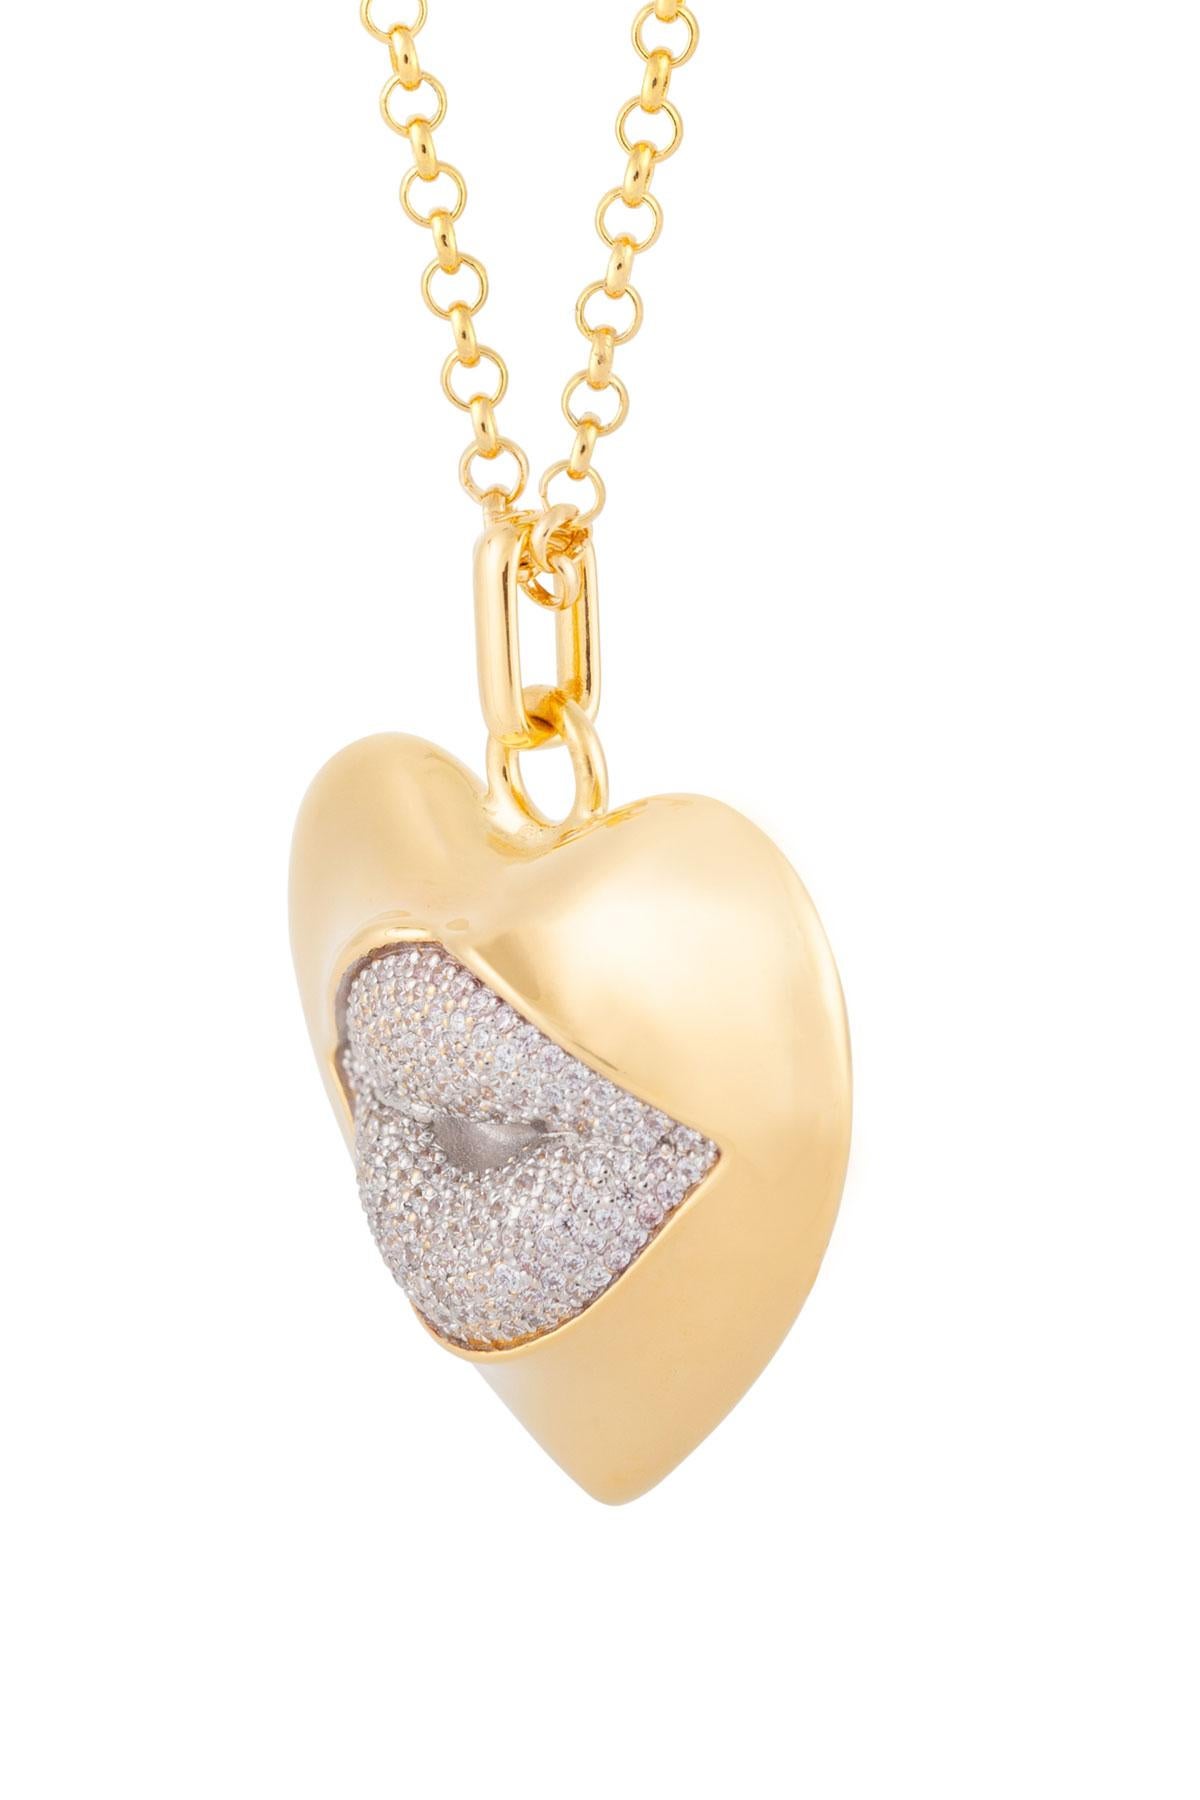 Love starts with the heart and lasts on the lips. This might be the sexiest necklace ever! Our sexy gold statement heart necklace with a diamond kiss. Shine your love on!

Composition: Sterling silver, 18K gold vermeil, Rhodium plated
Color: Gold &